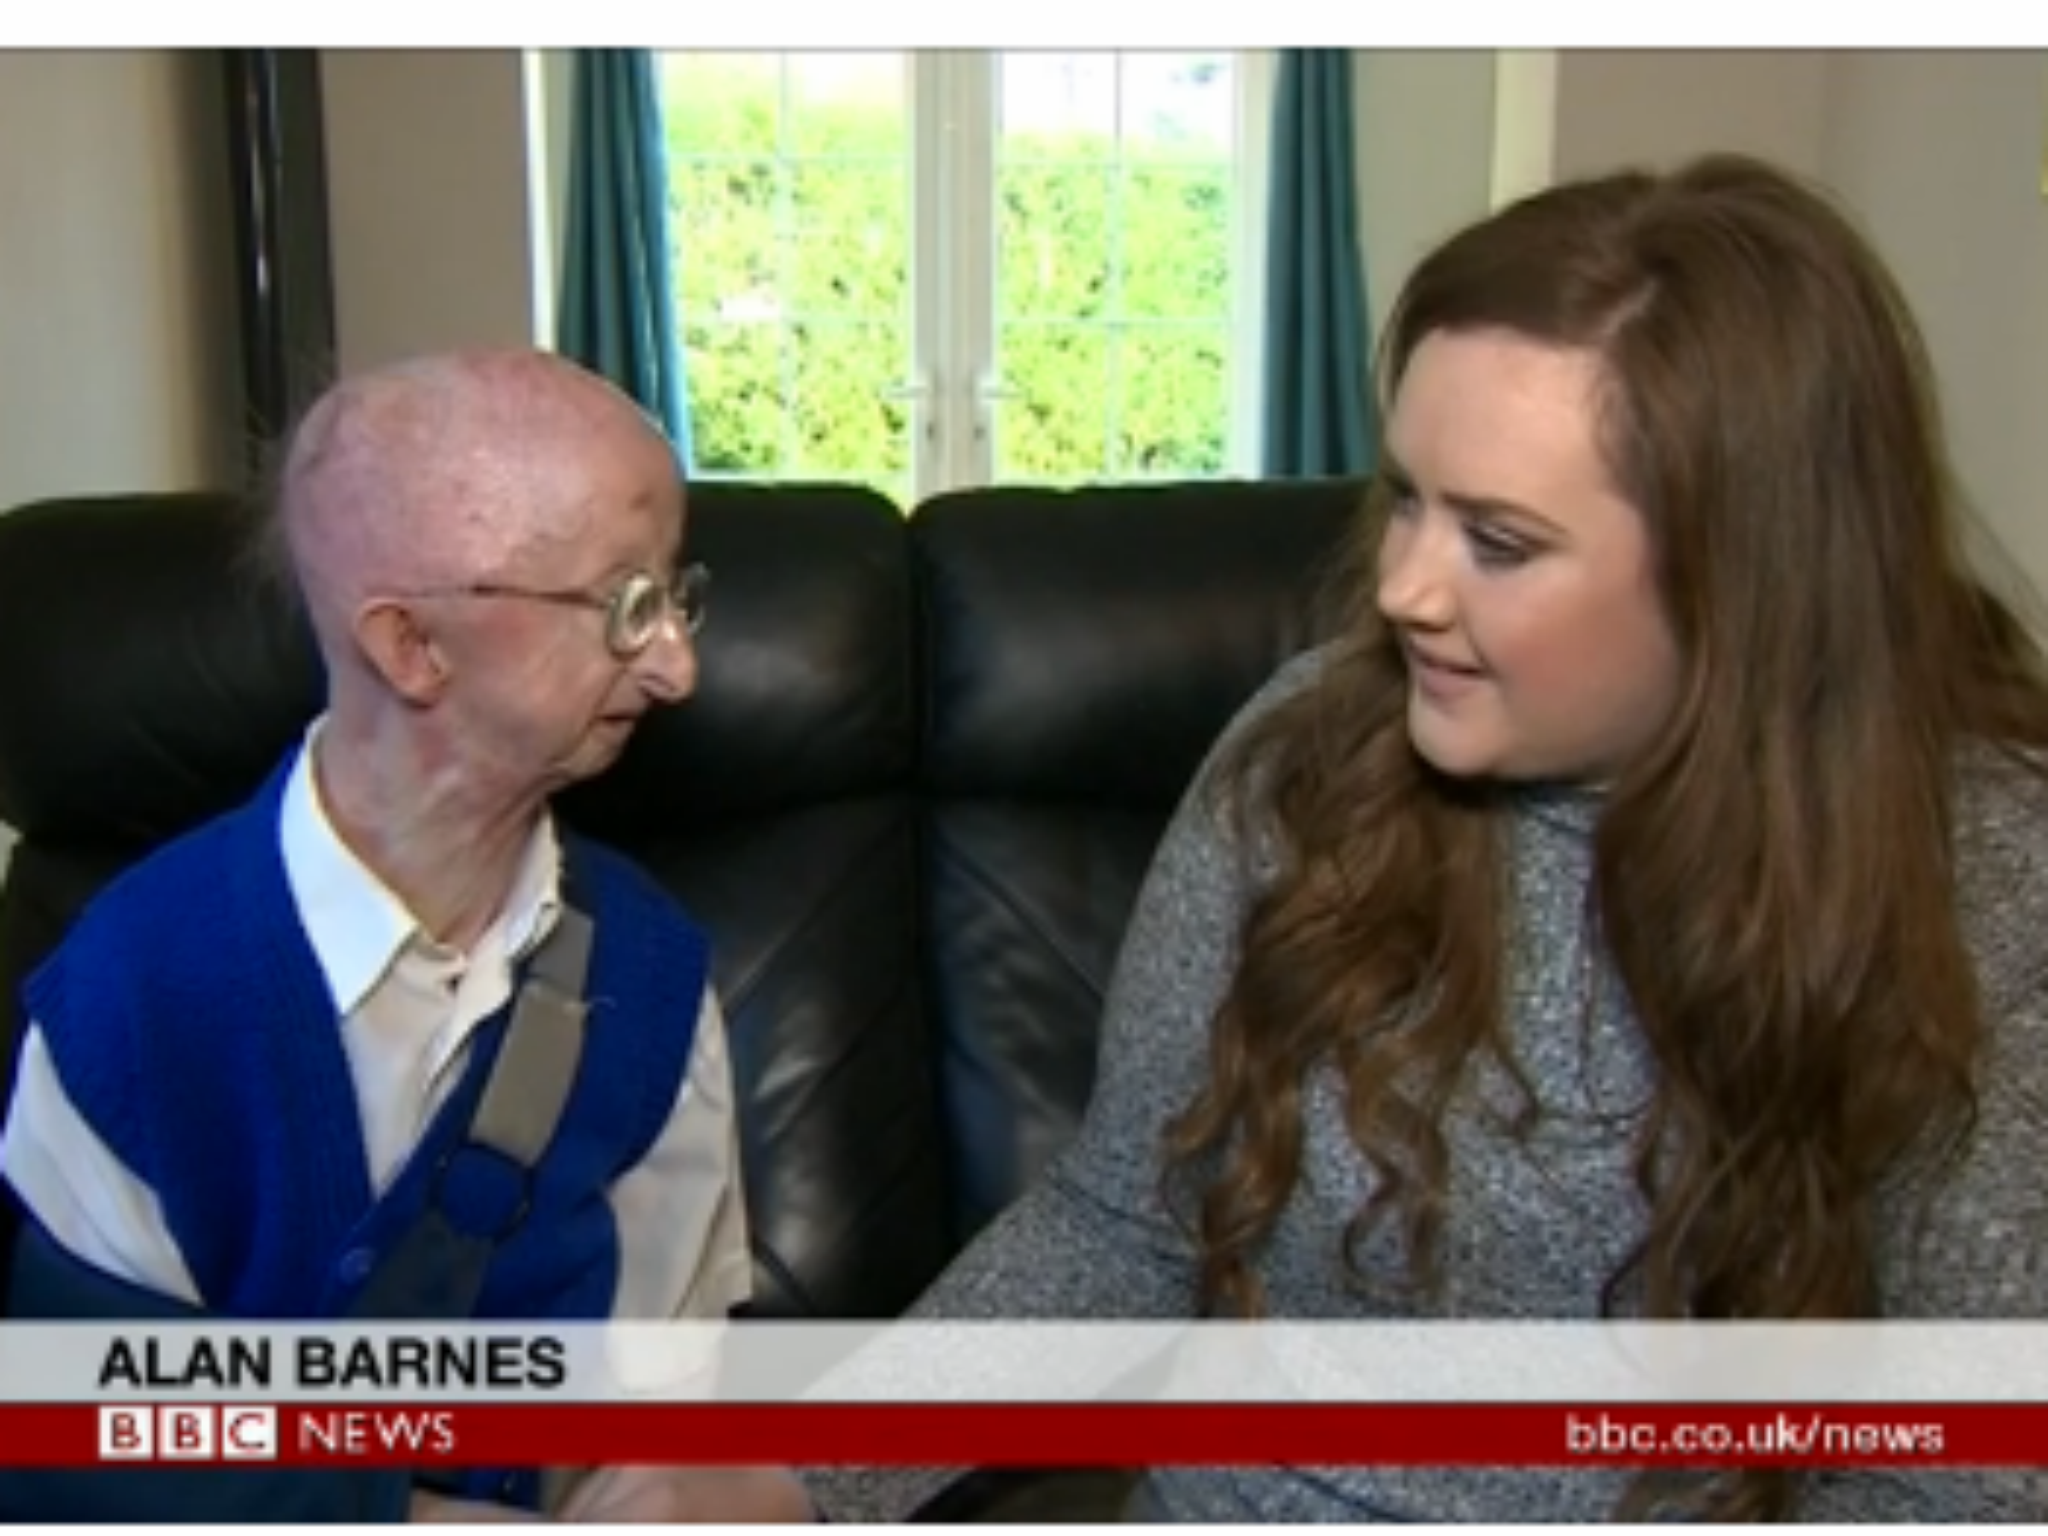 Mugged pensioner Alan Barnes met fund raiser Katie Cutler for the first time today